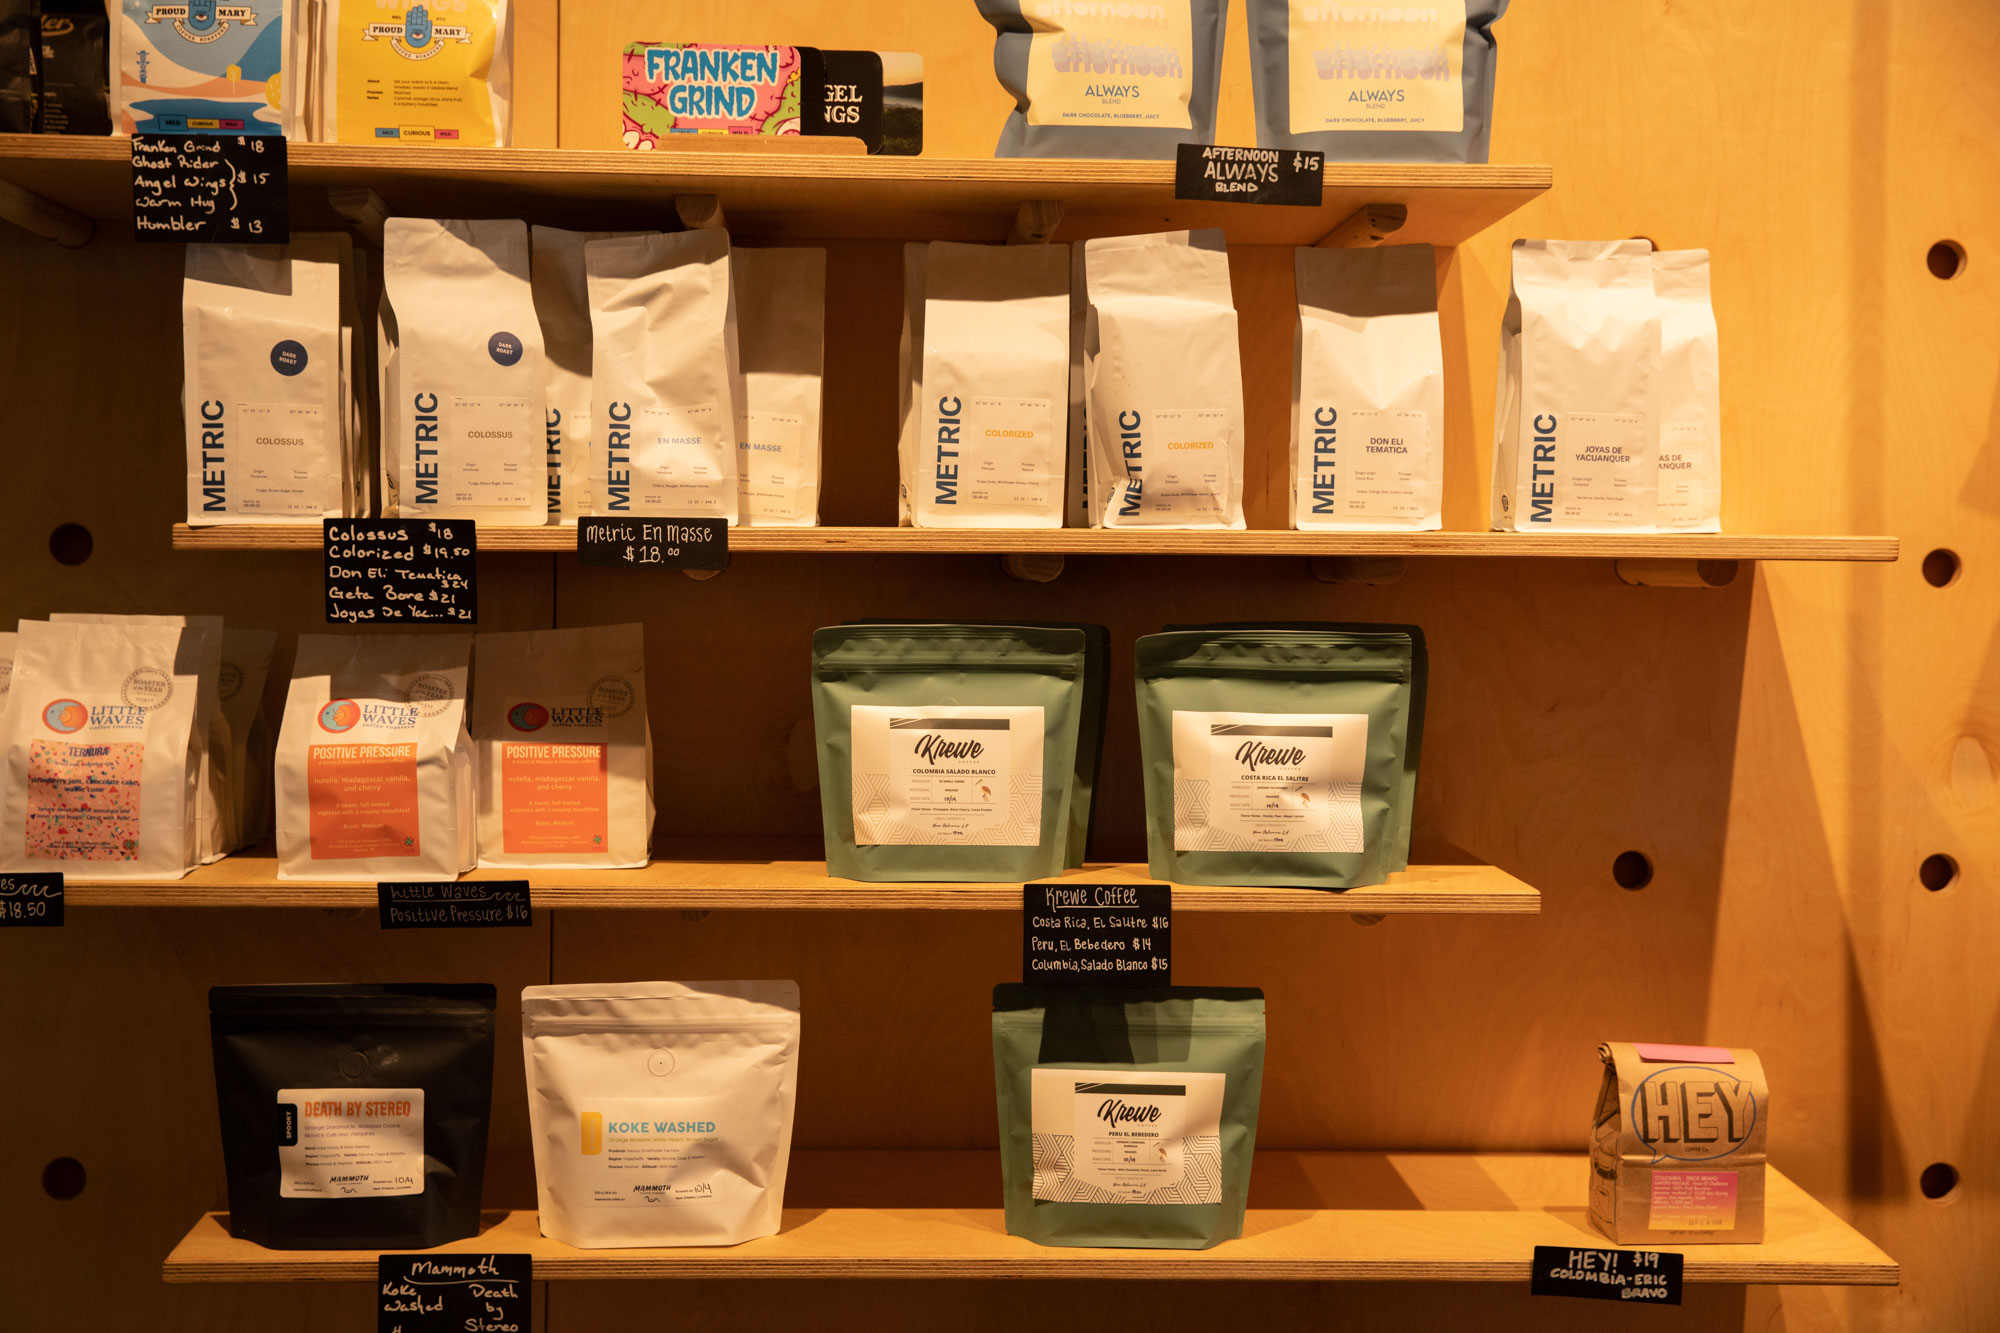 Shelves, paper bags with various ingredients and brand names